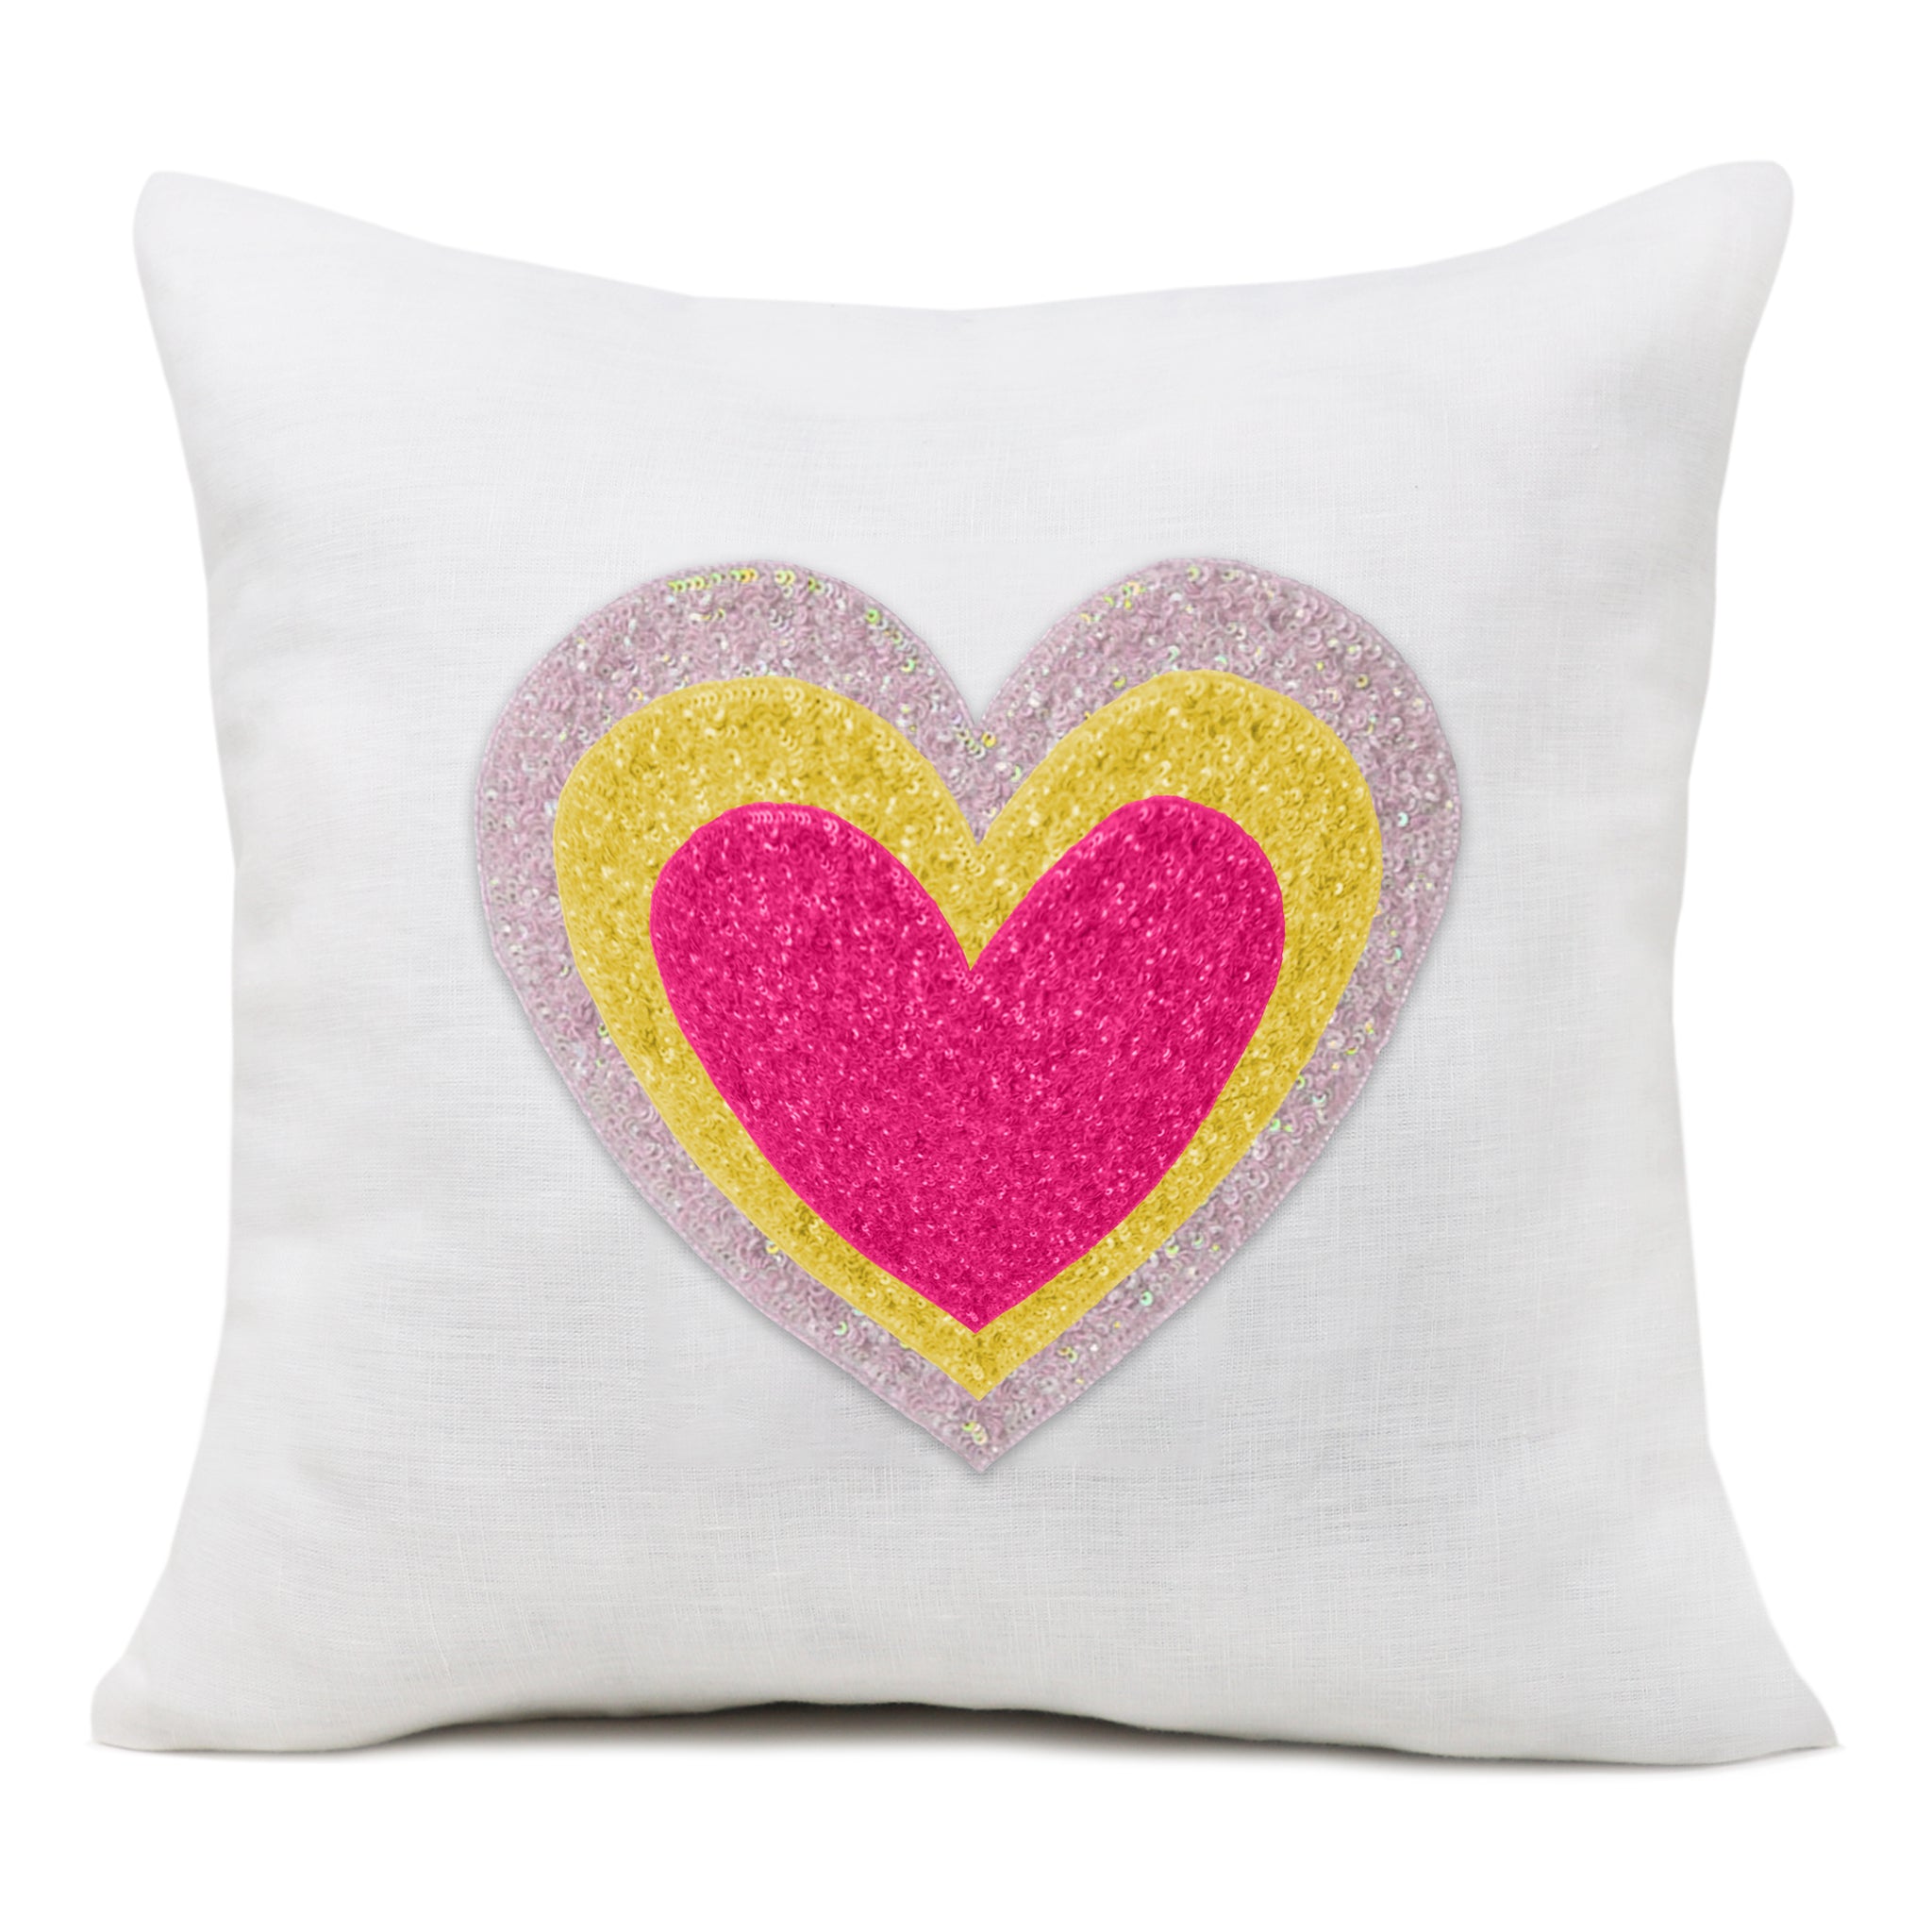 Love-Inspired Barbie Chic Pillow Cover